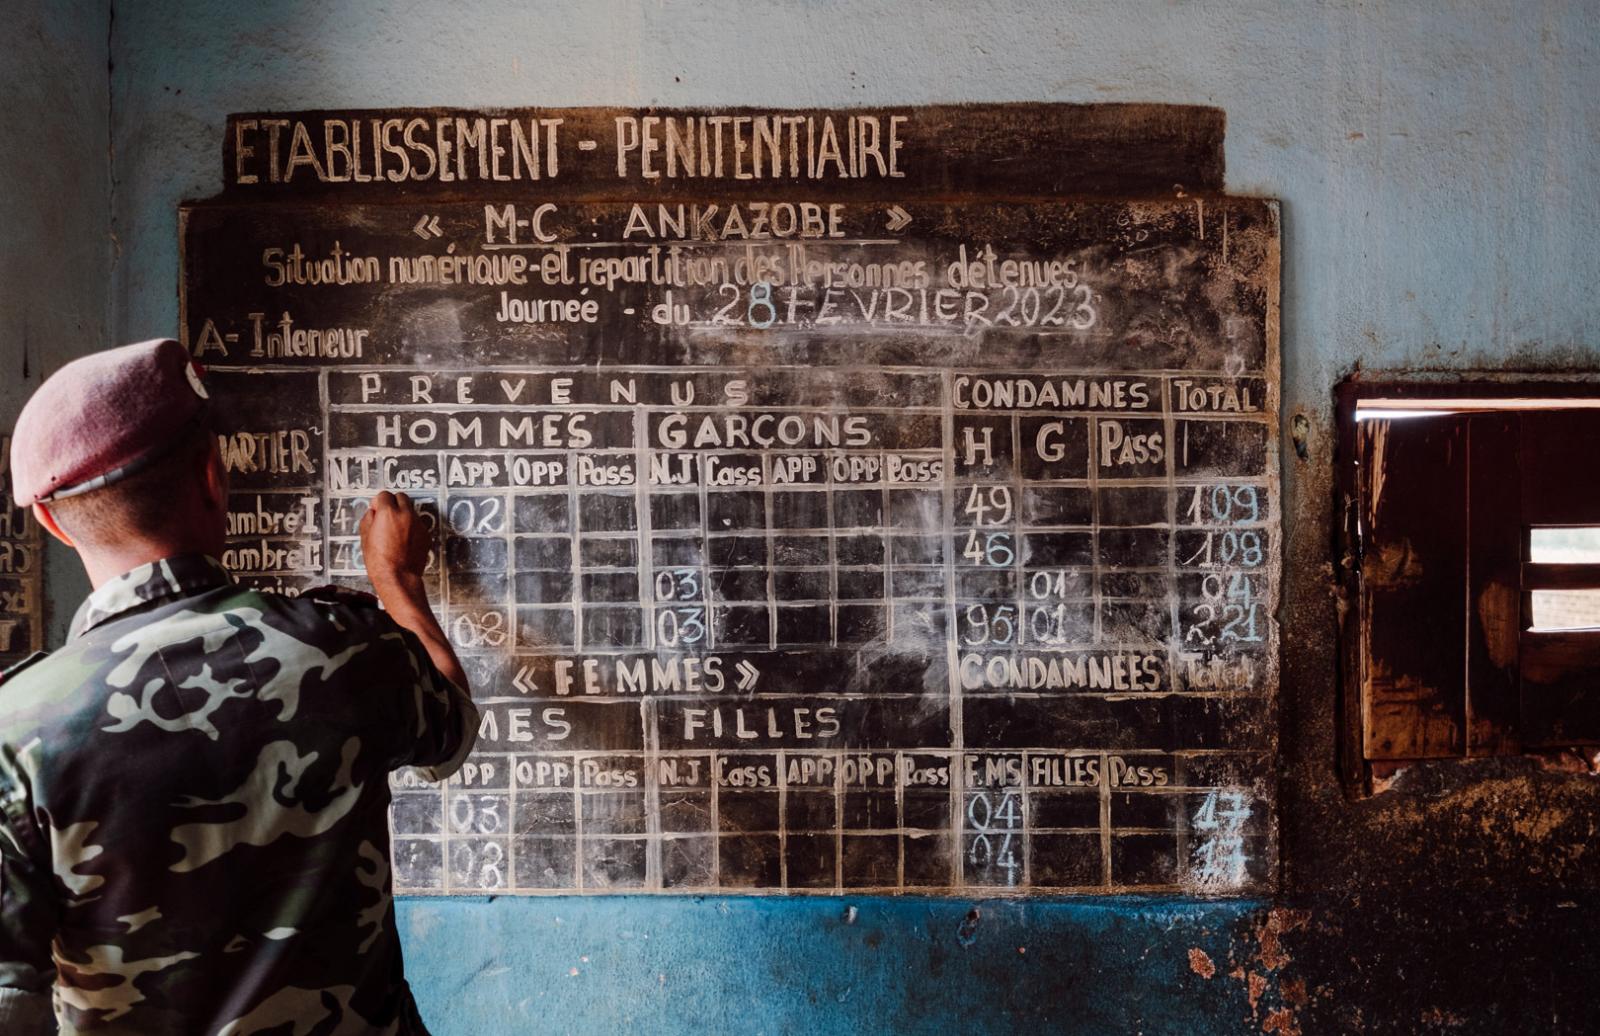 Penitentiary officer writes number of detainees in black board